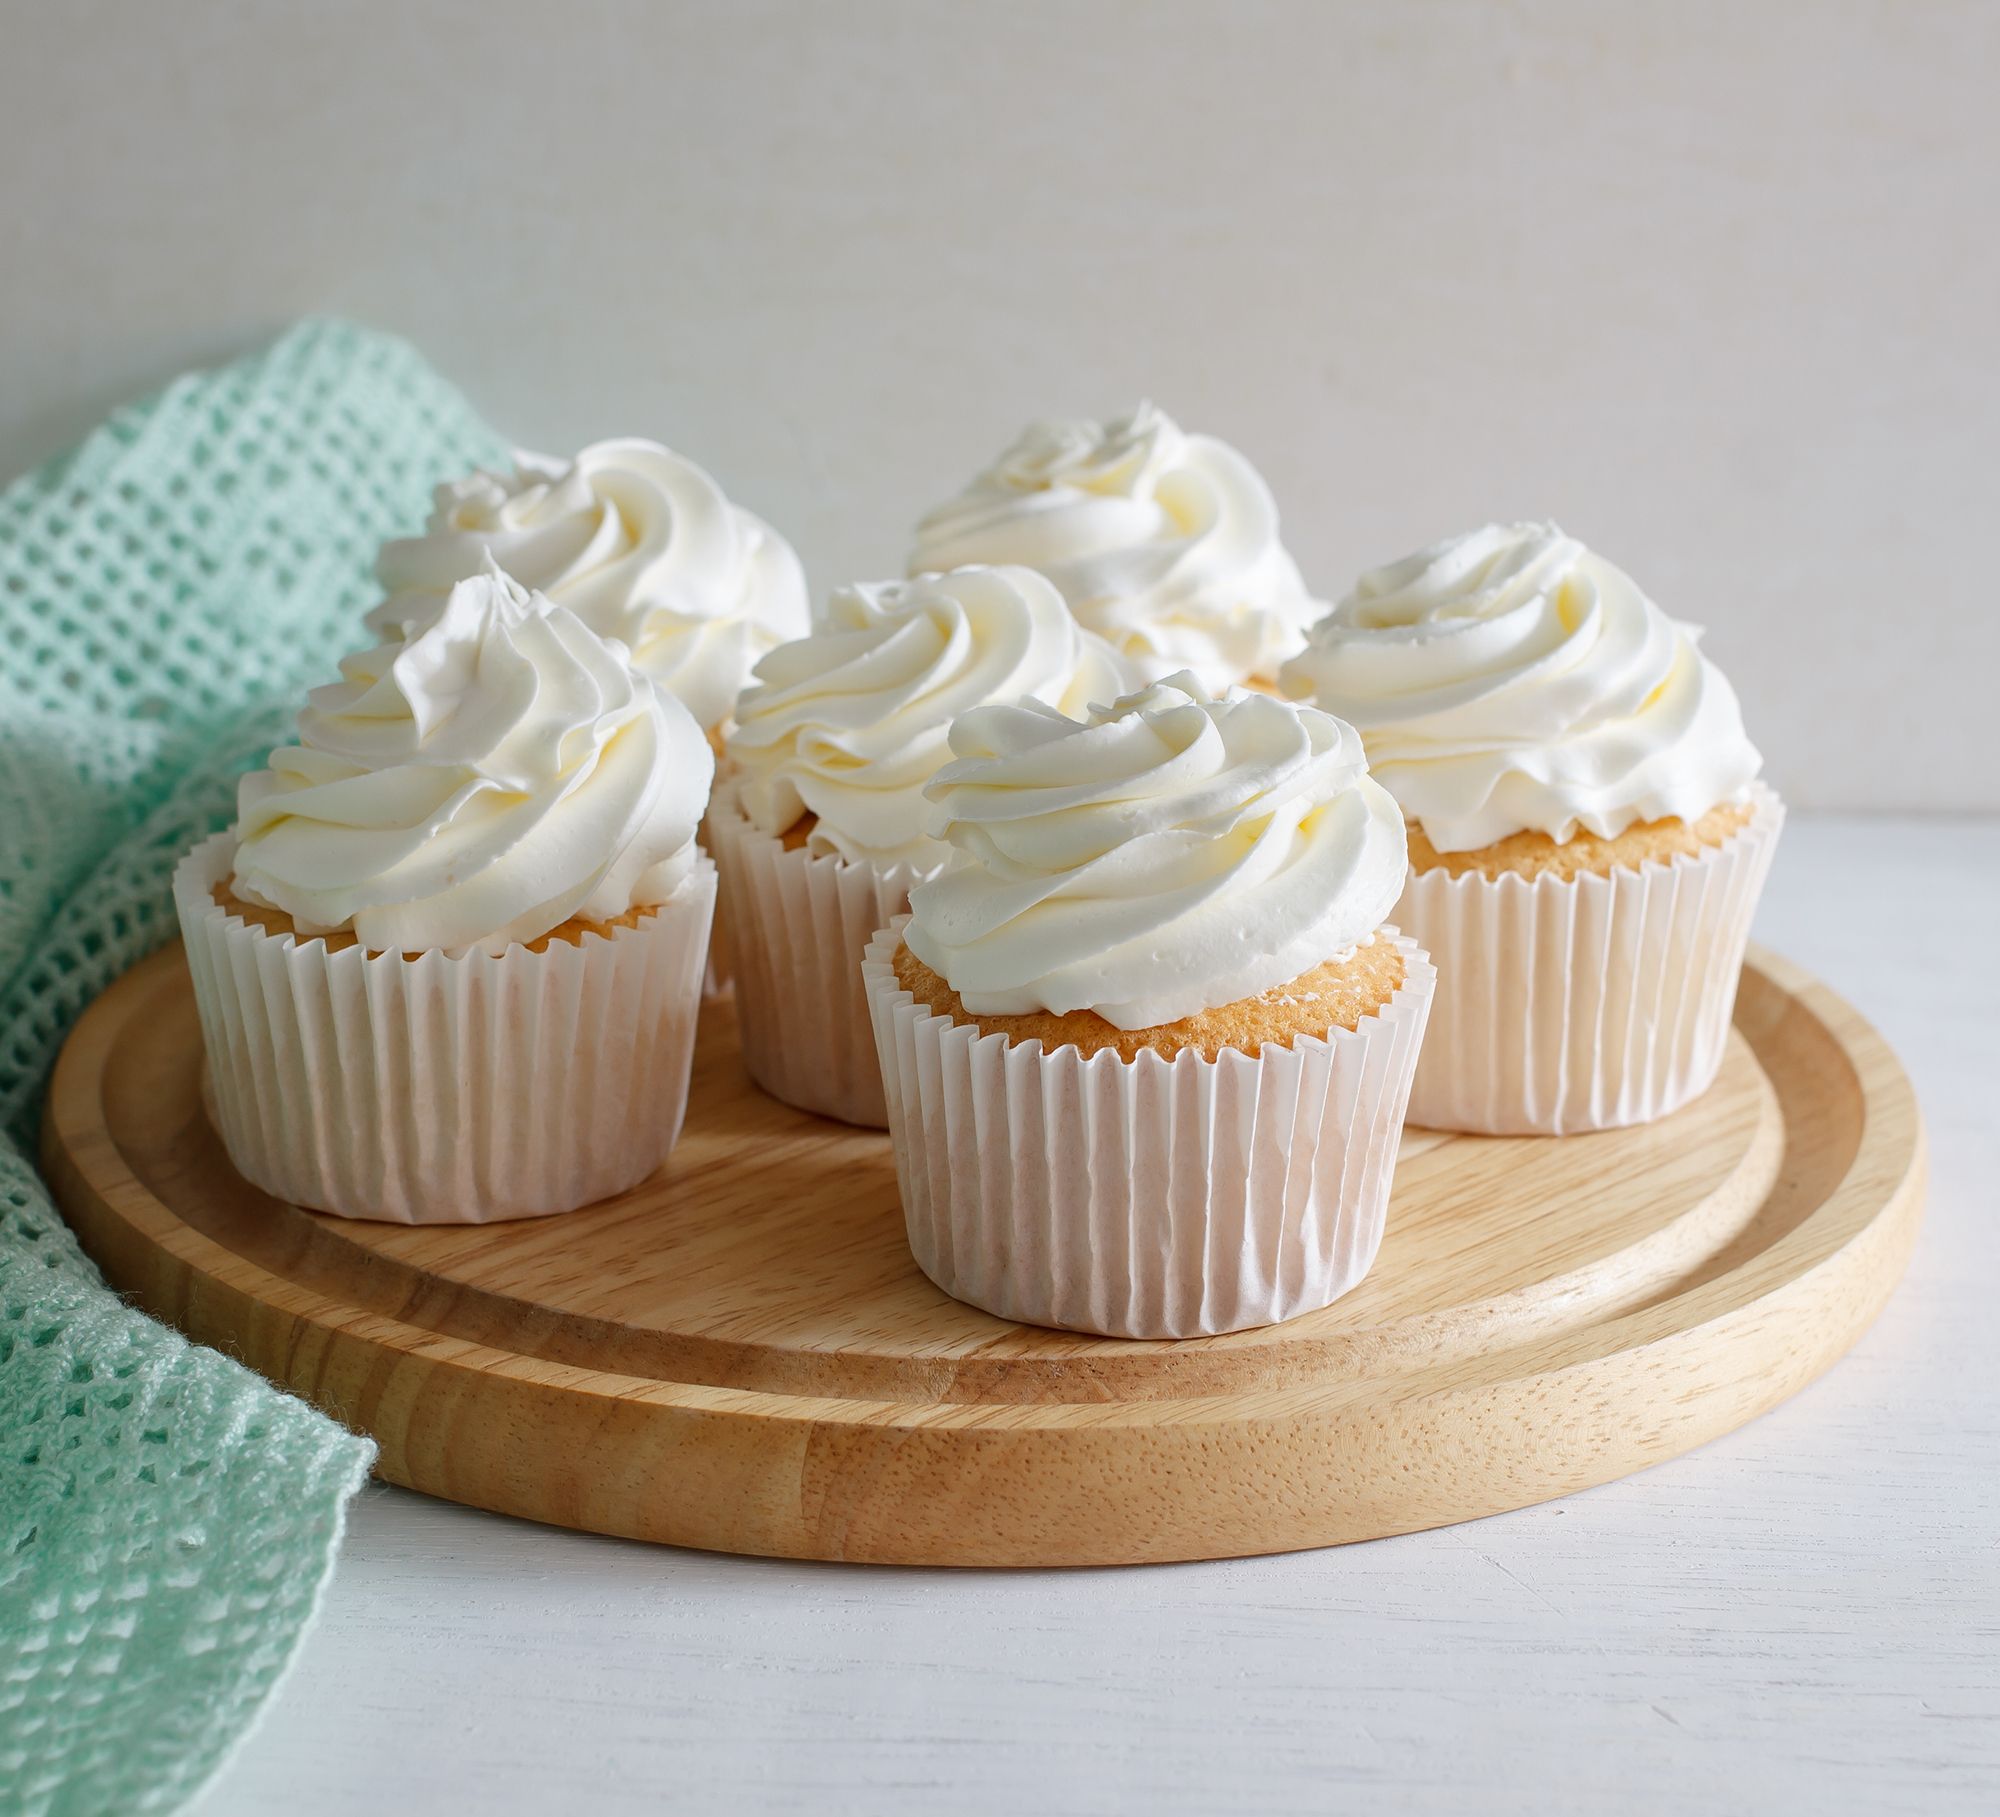 Small Batch Cupcakes from a Box of Cake Mix - The Birch Cottage